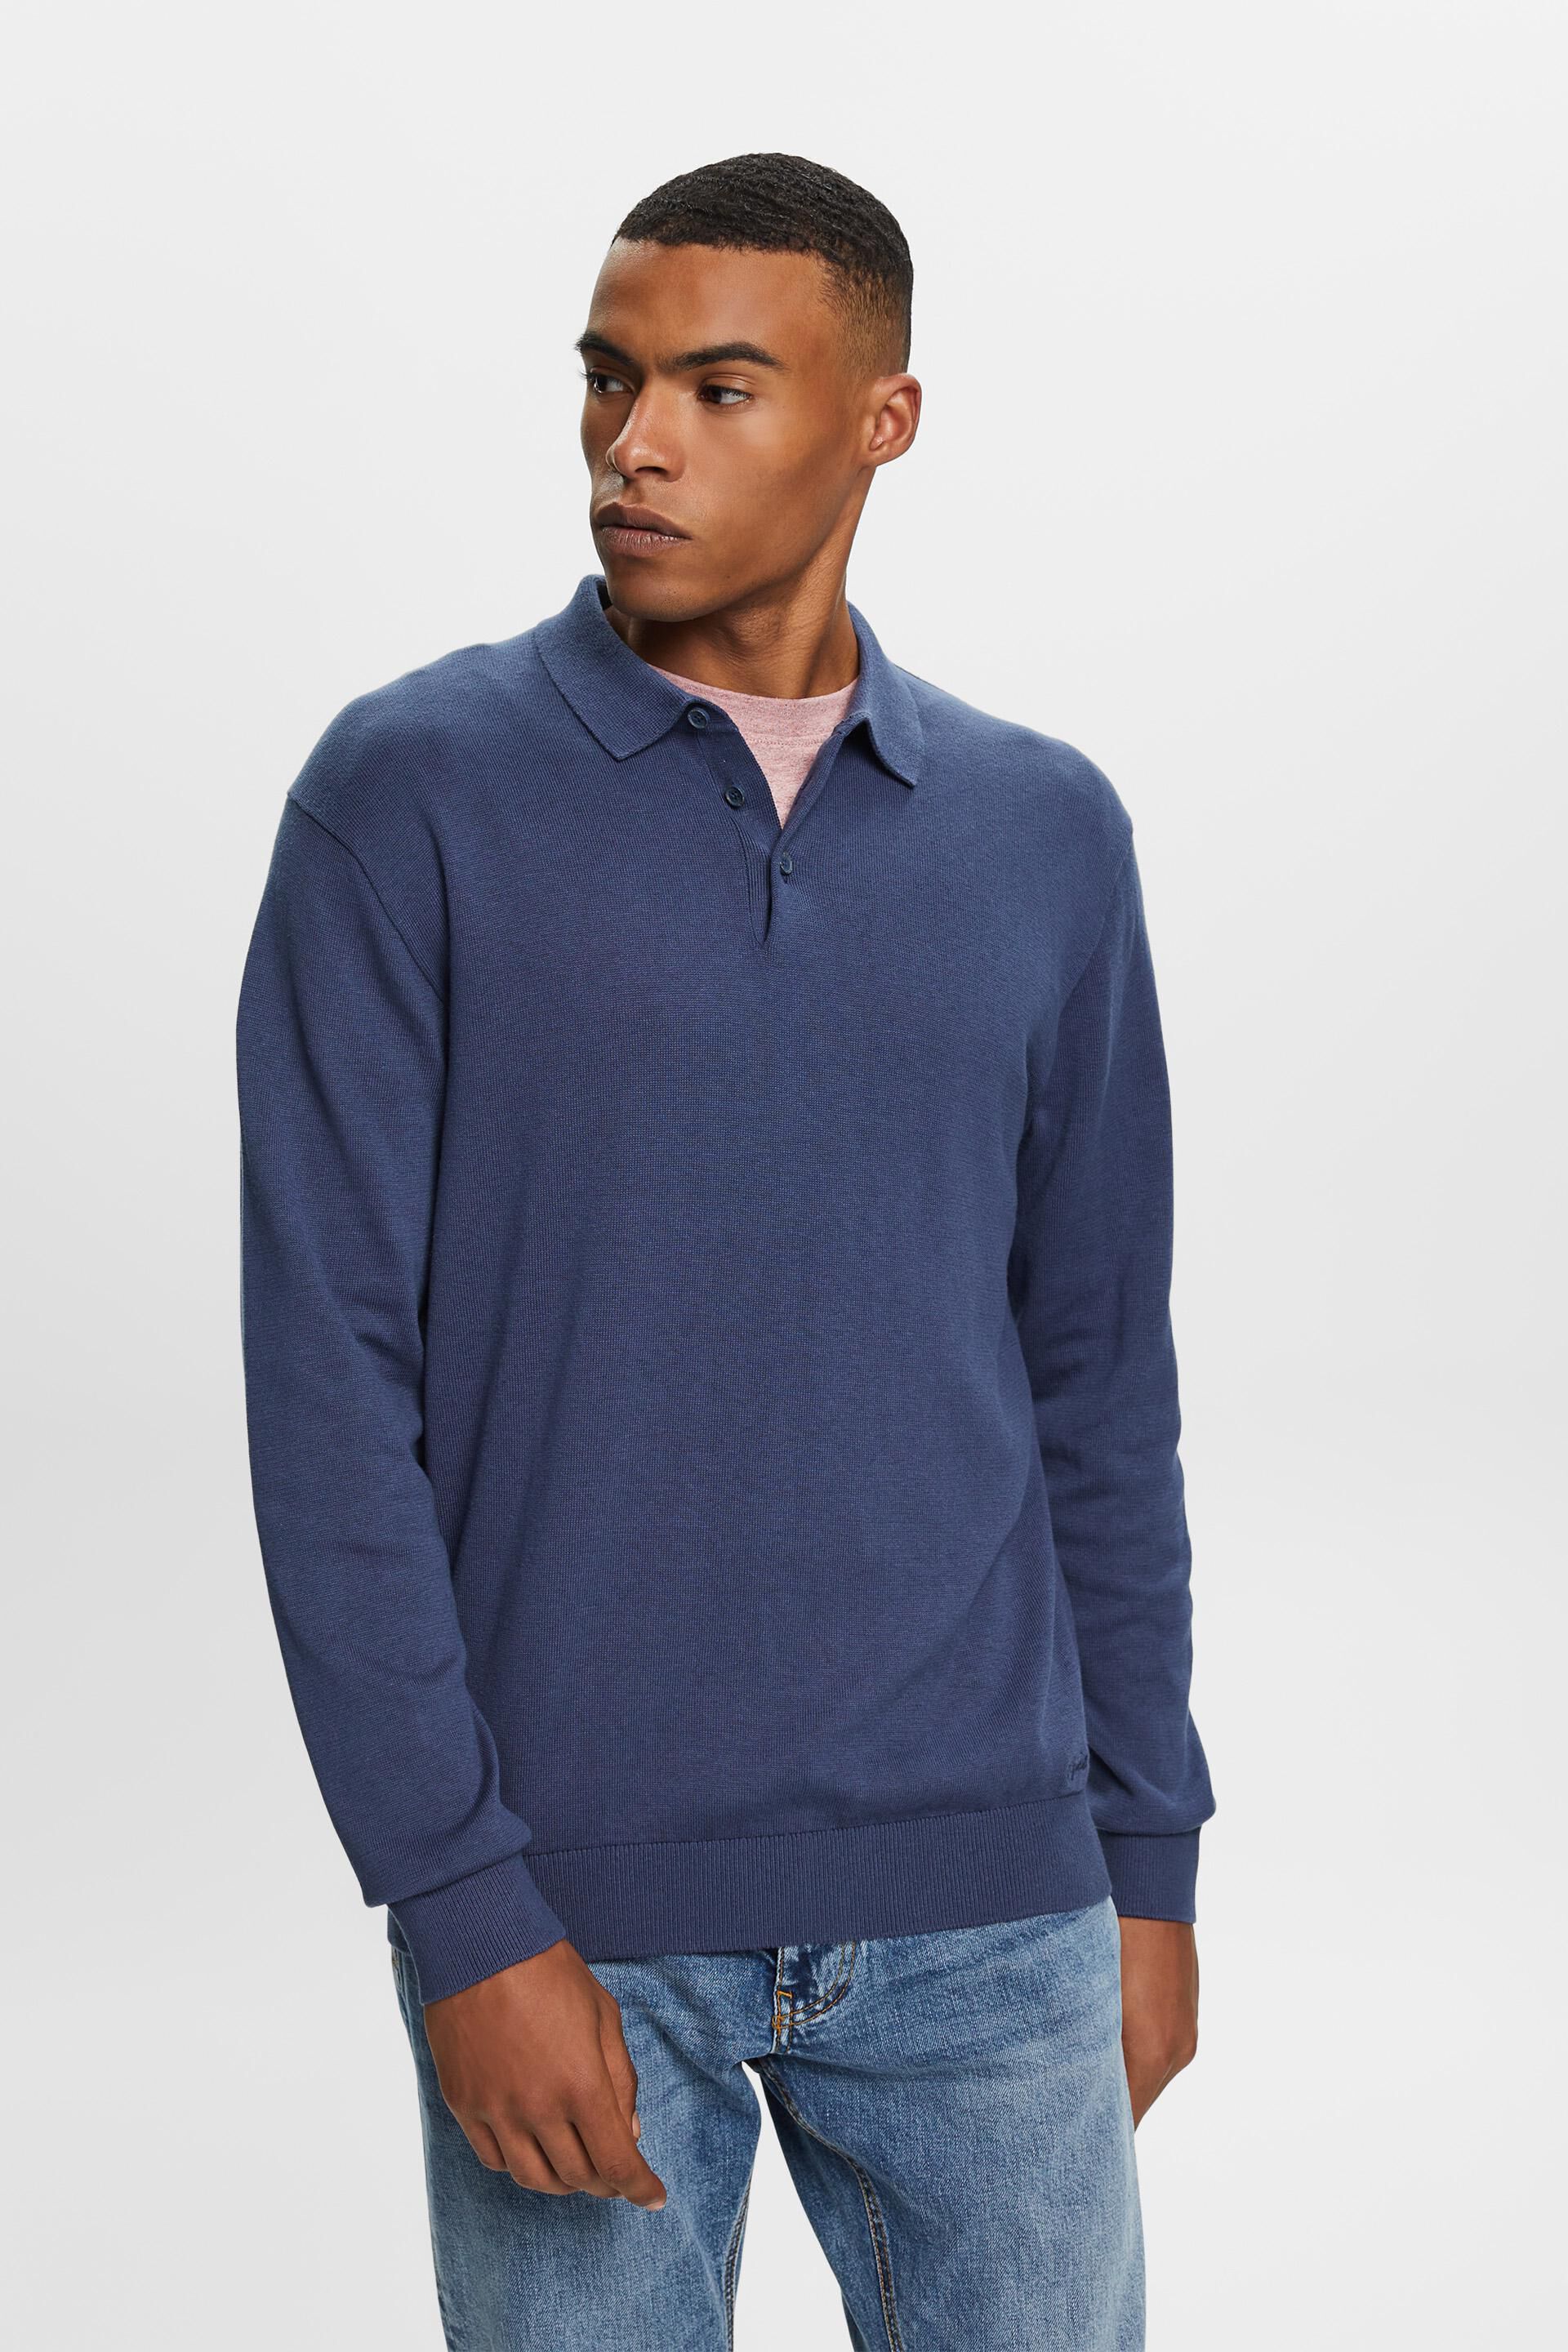 Esprit jumper with polo TENCEL™ a Knit collar,